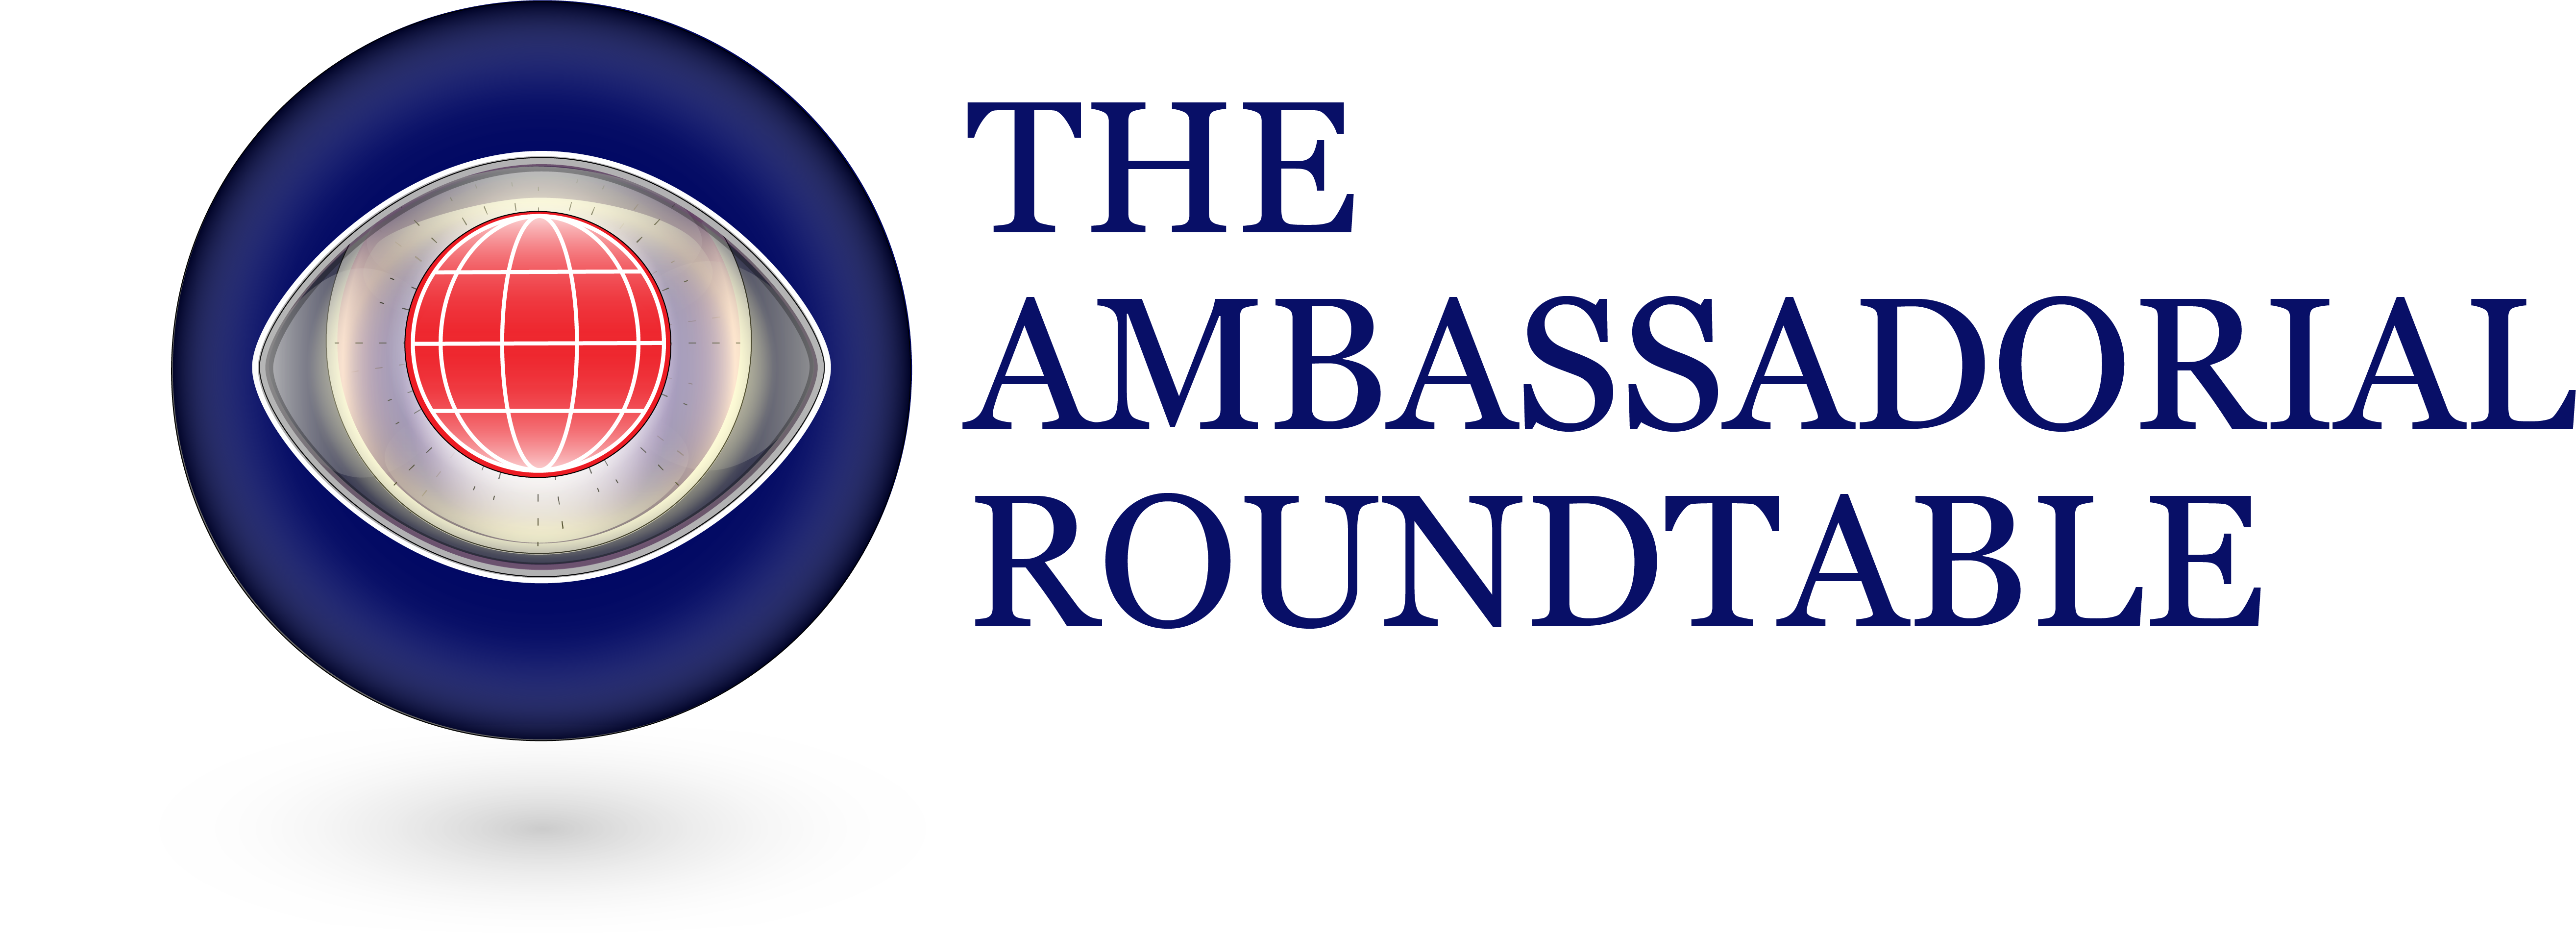 The Ambassadorial Roundtable